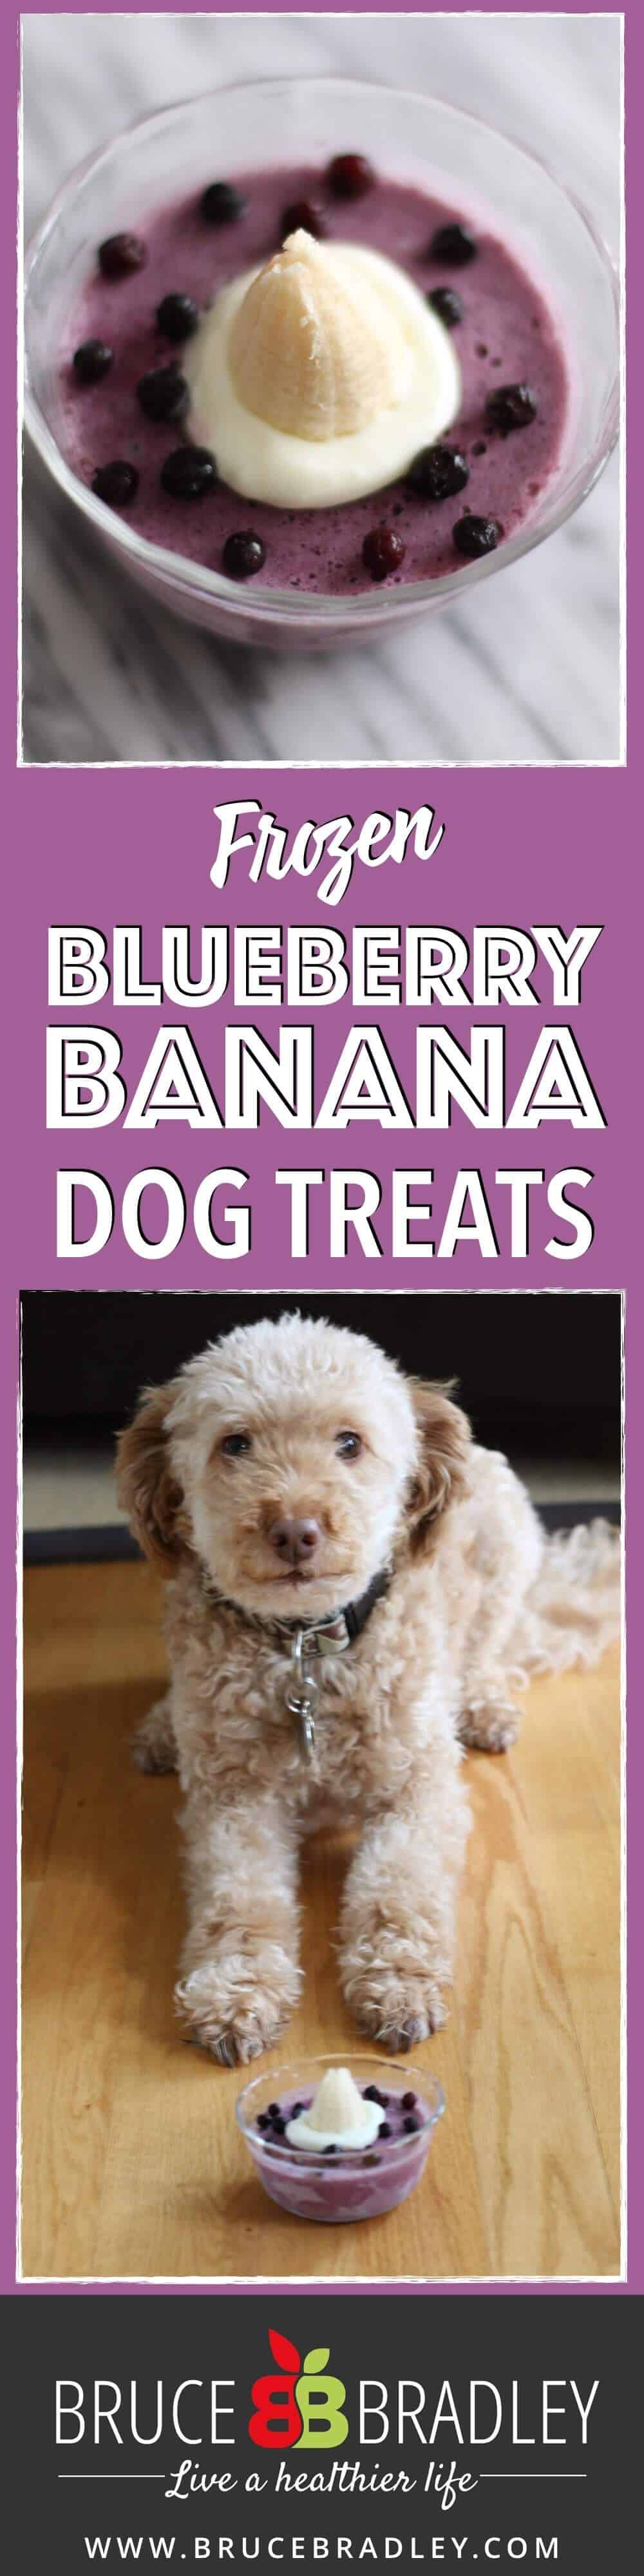 These Three Ingredient Frozen Dog Treats Are The Perfect Way To Celebrate Or Reward Your Special Pooch. Made With Yogurt, Blueberries, And A Banana, You Can Whip These Treats Up In Less Than 5 Minutes, Freeze, And Share!